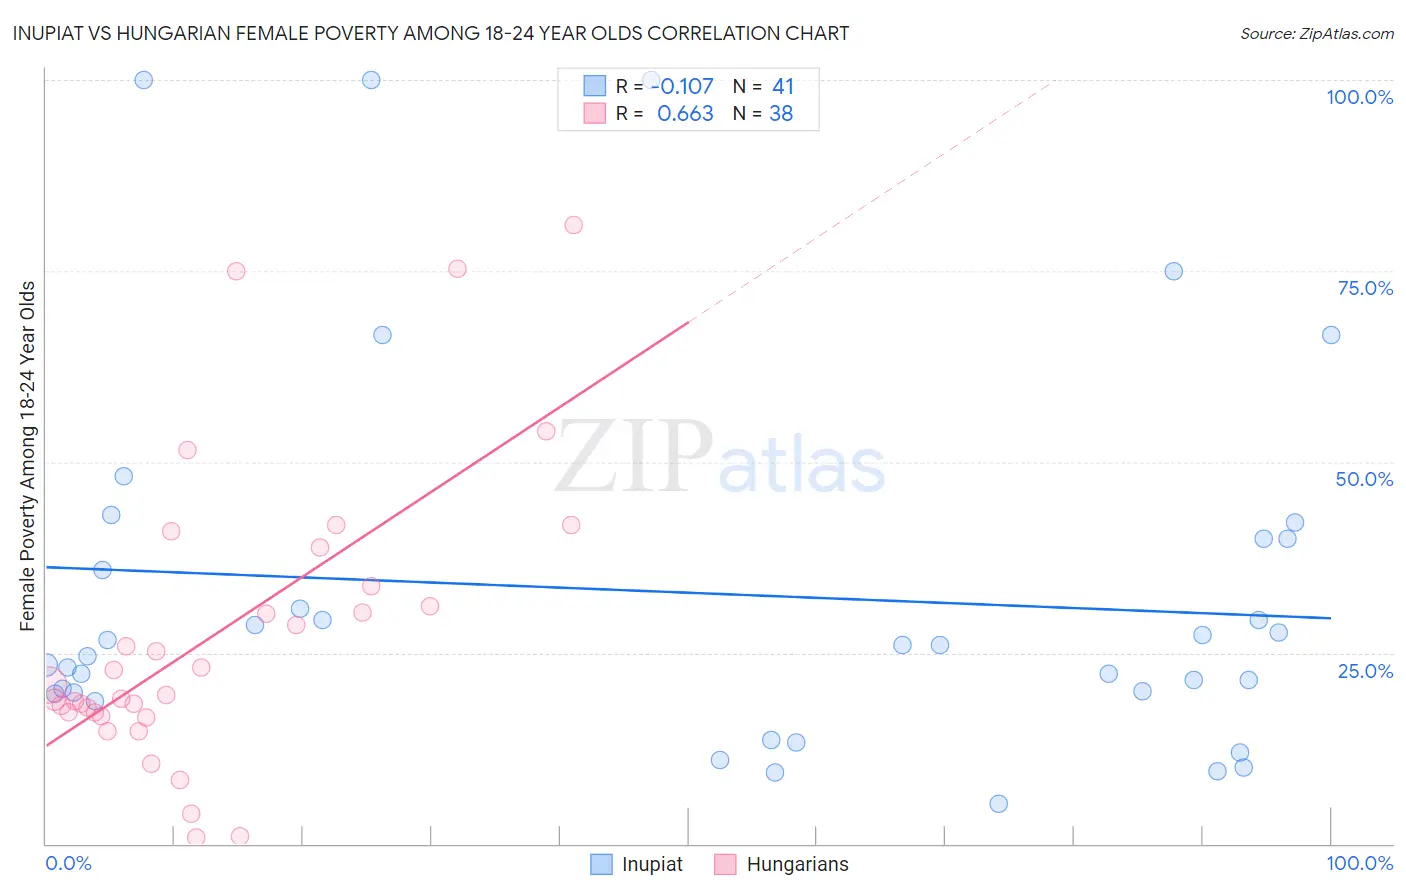 Inupiat vs Hungarian Female Poverty Among 18-24 Year Olds